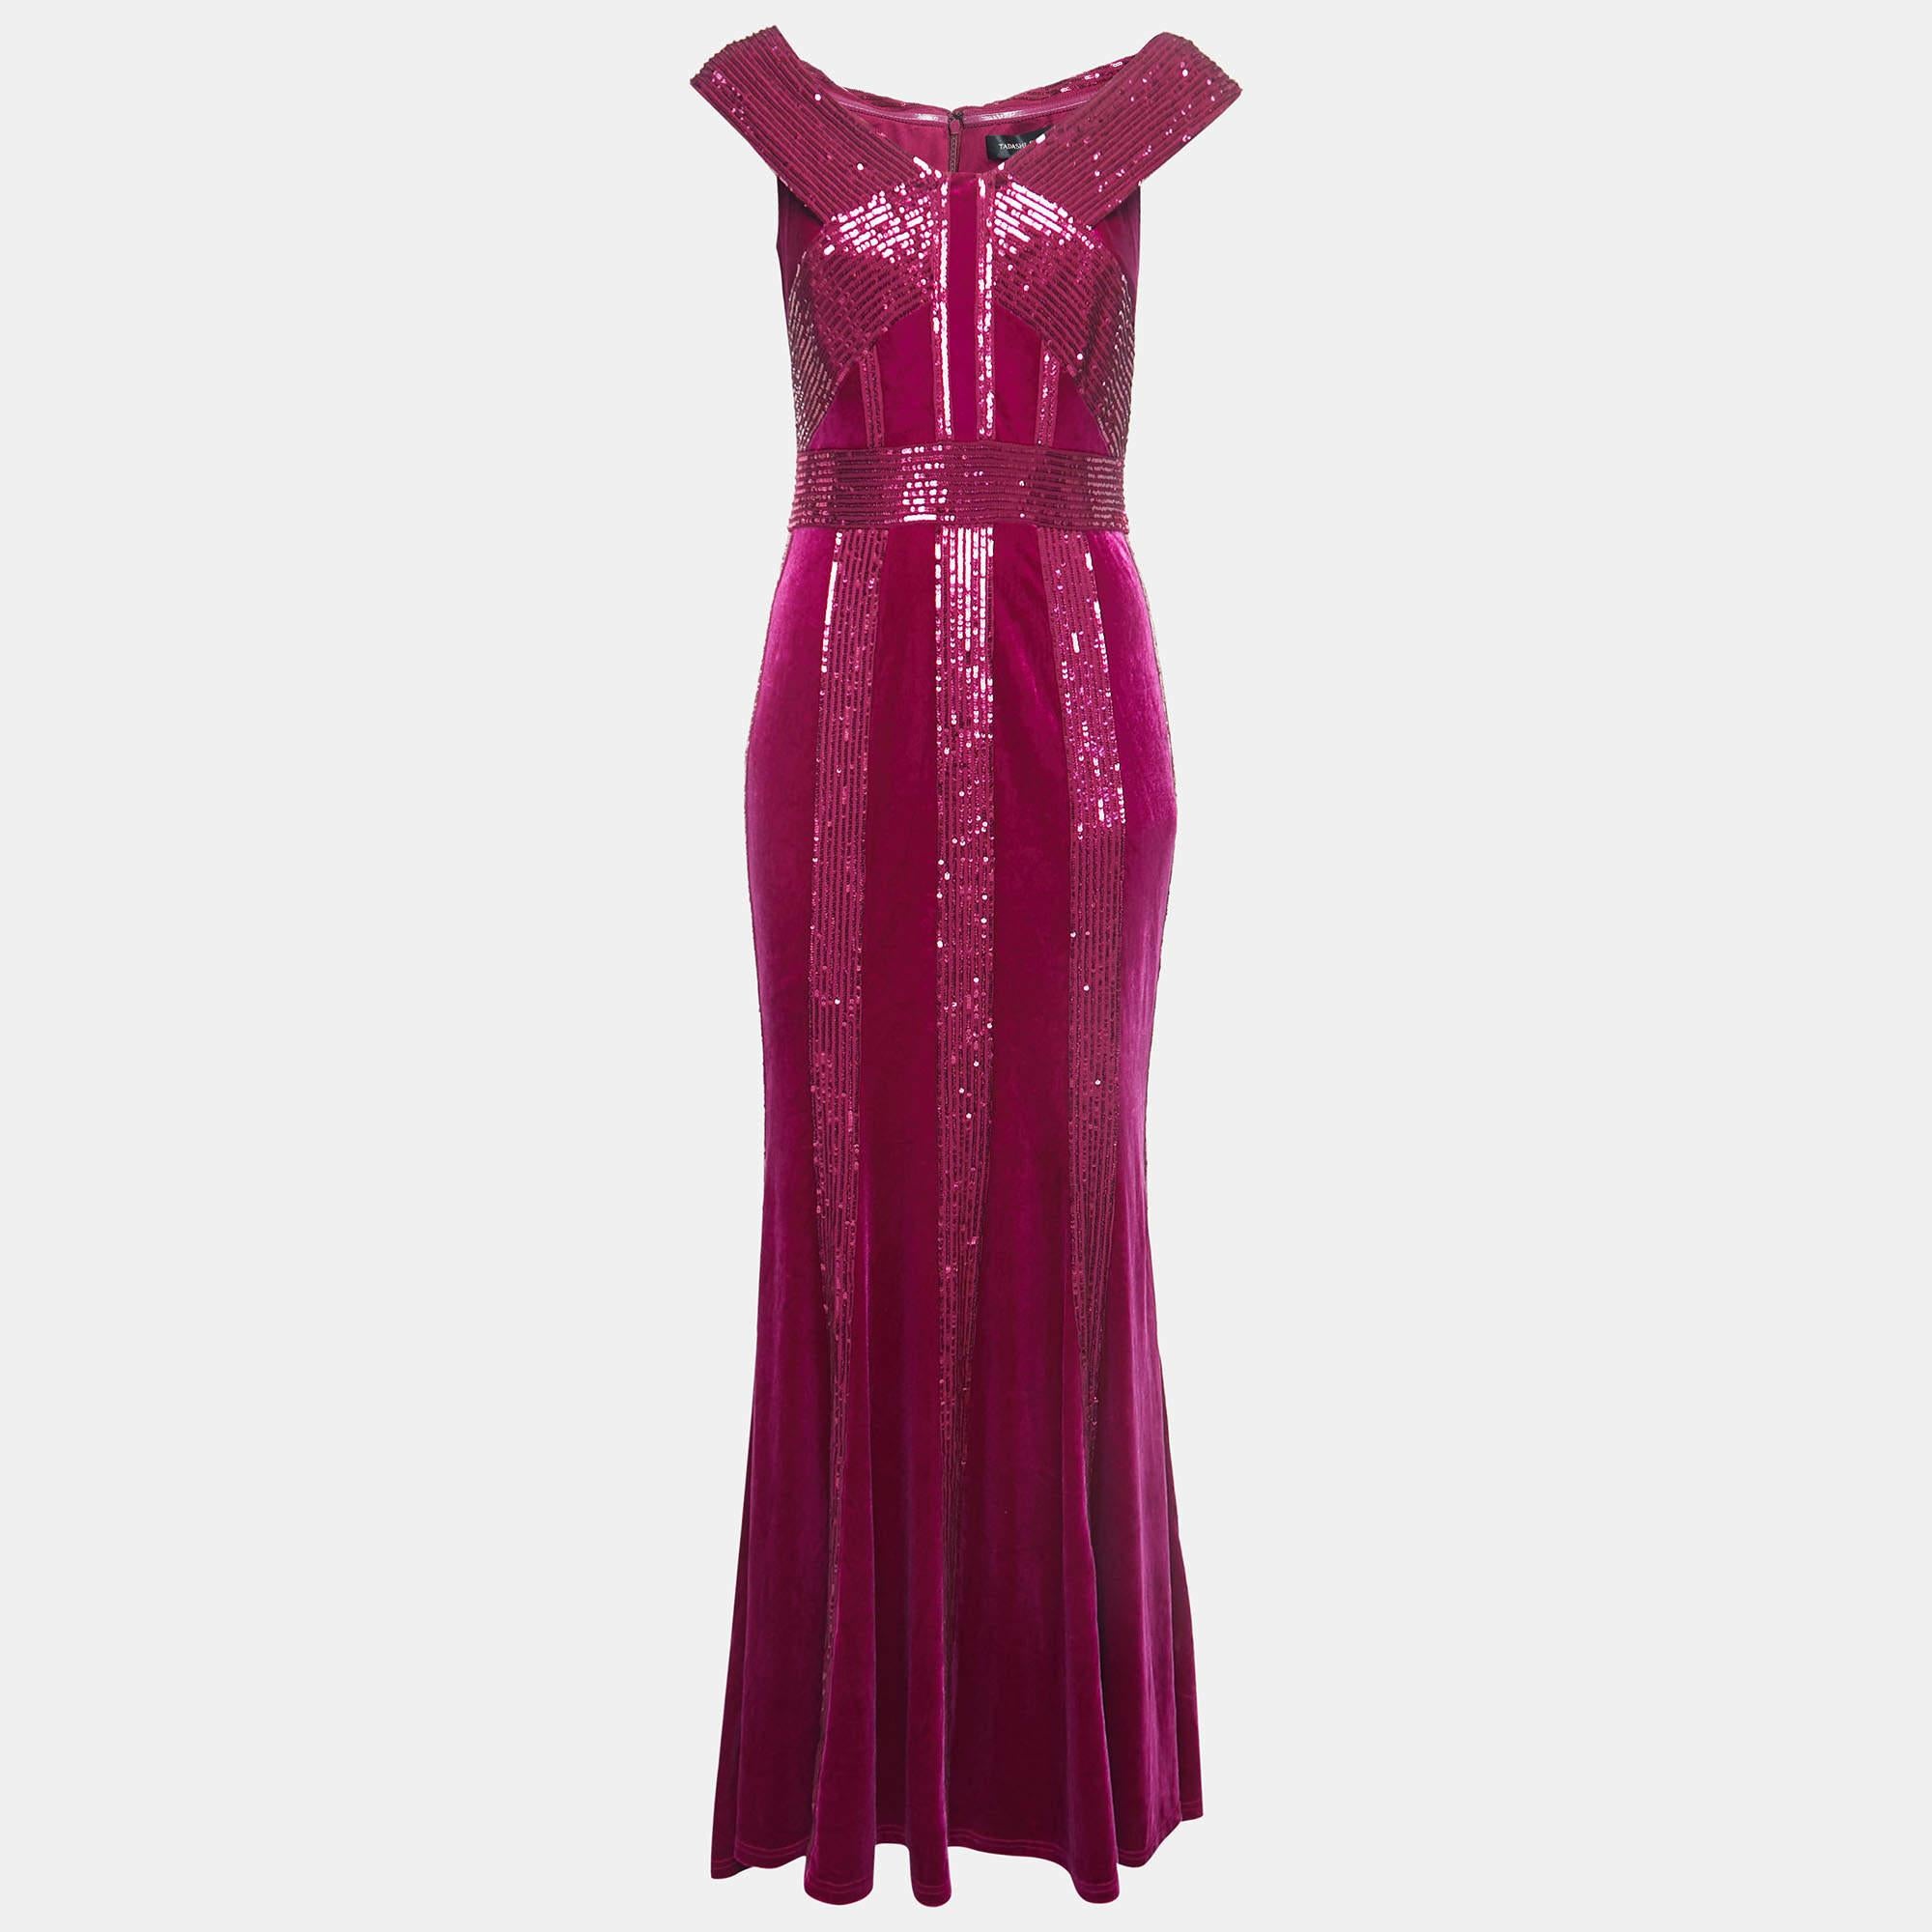 The fine artistry and the feminine silhouette of this designer dress exhibit the label's impeccable craftsmanship in tailoring. It is stitched using quality materials, has a good fit, and can be easily styled with chic accessories, open-toe sandals,